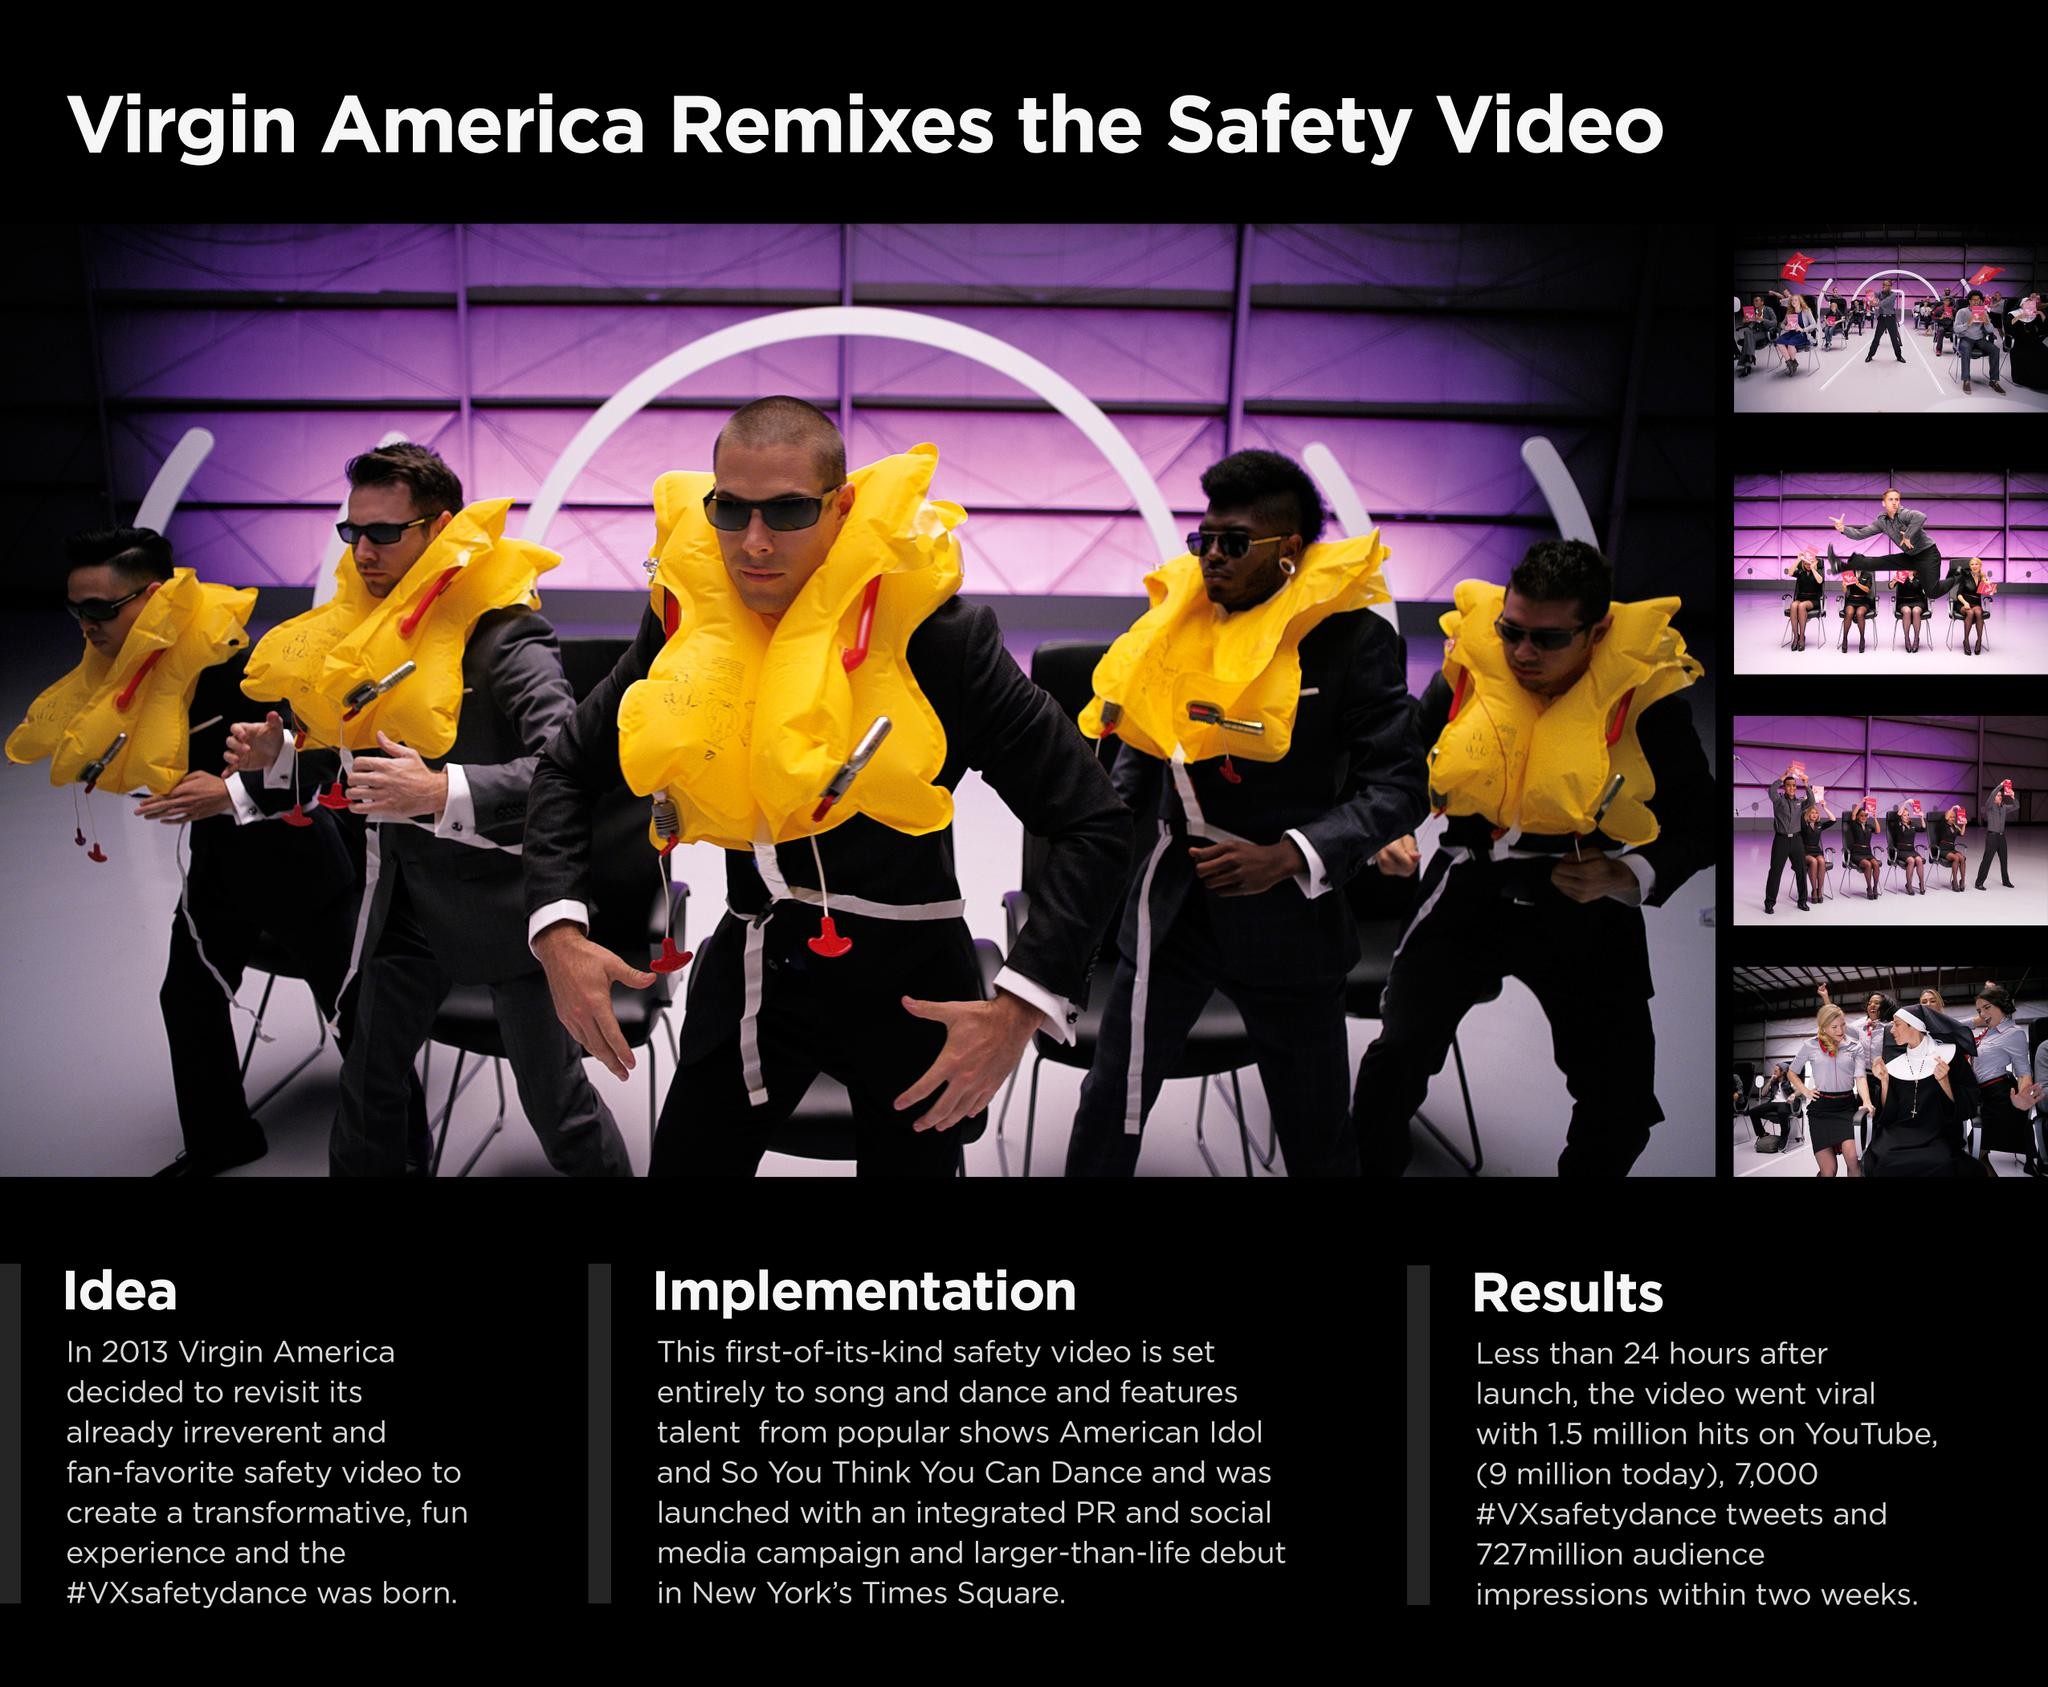 VIRGIN AMERICA REMIXES THE SAFETY VIDEO